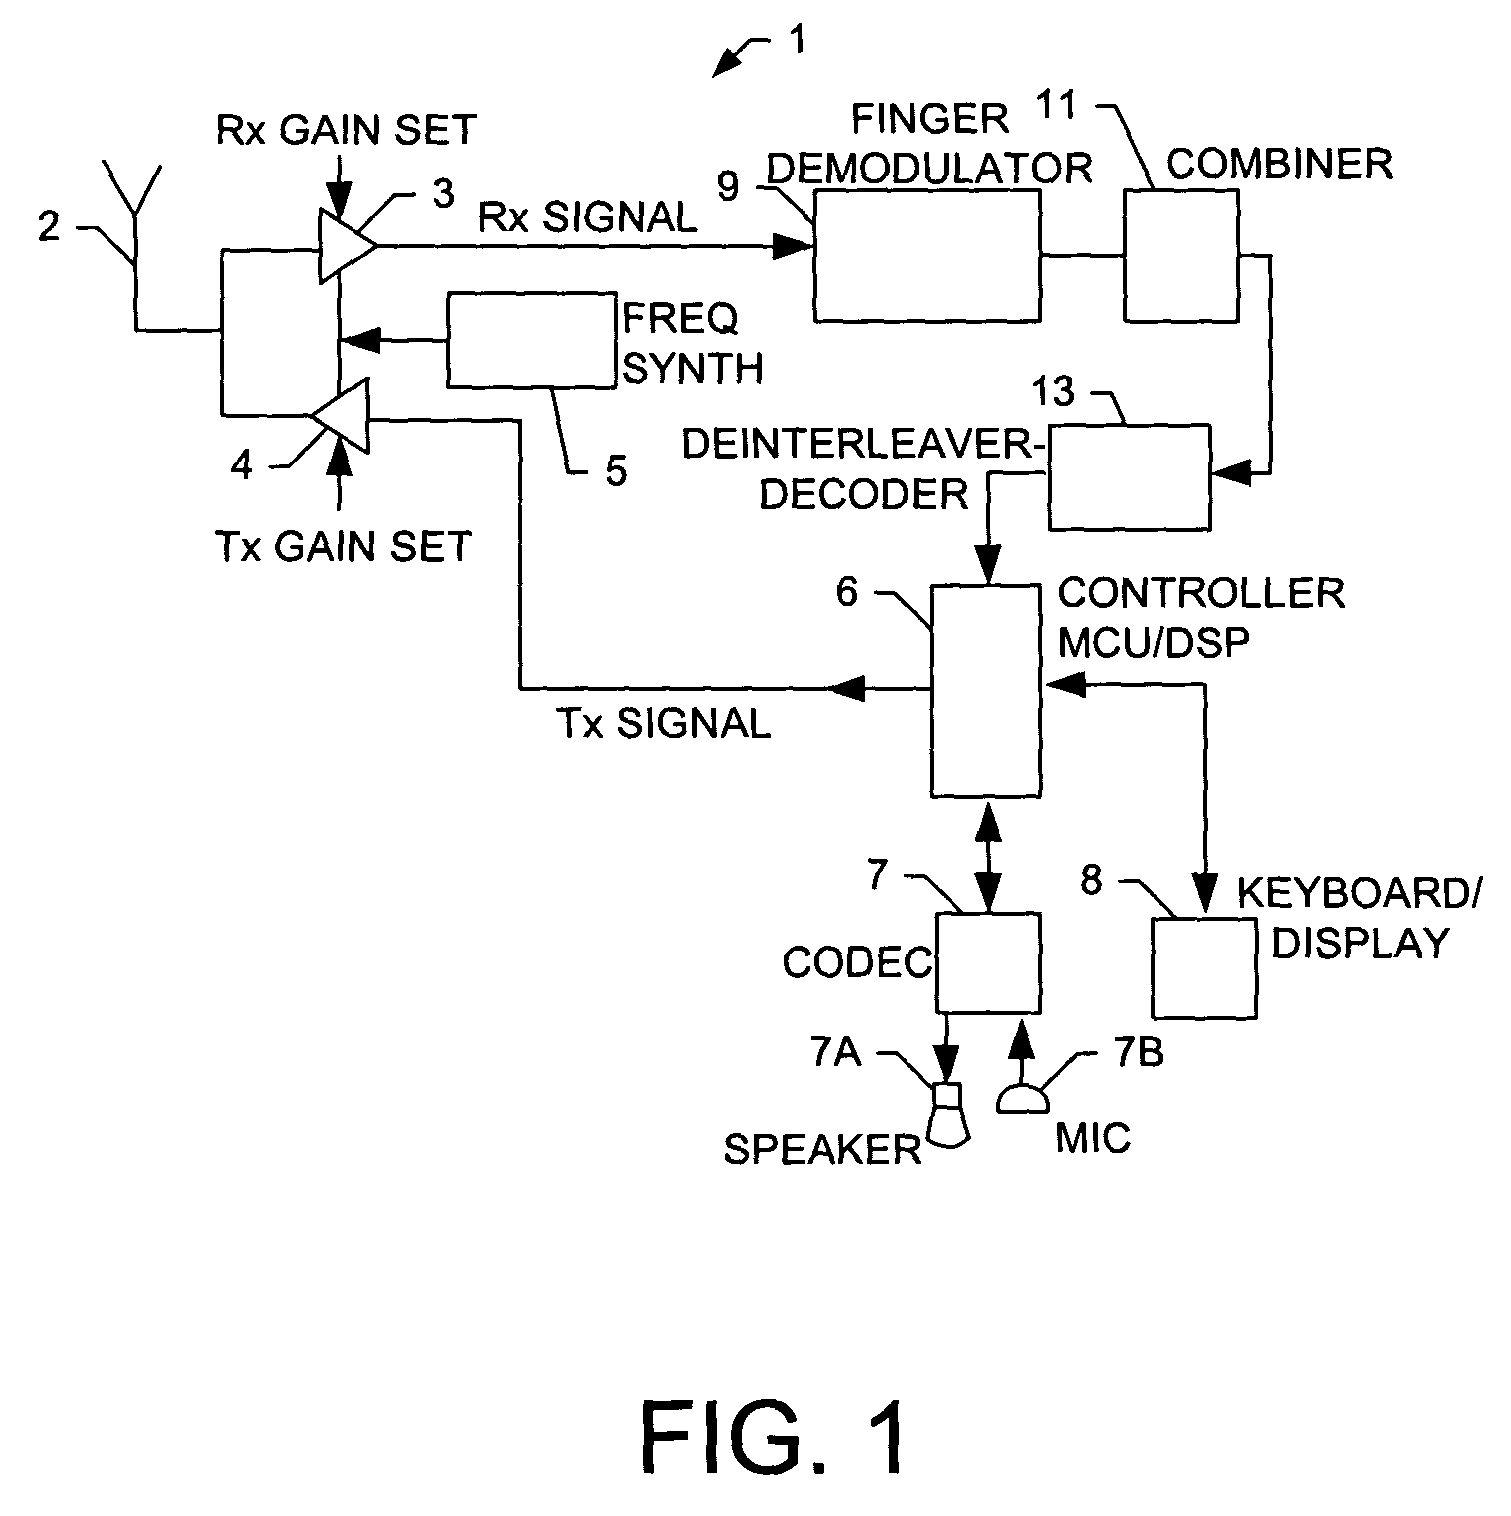 Interference suppression in a CDMA receiver during at least one of idle state and access state operation